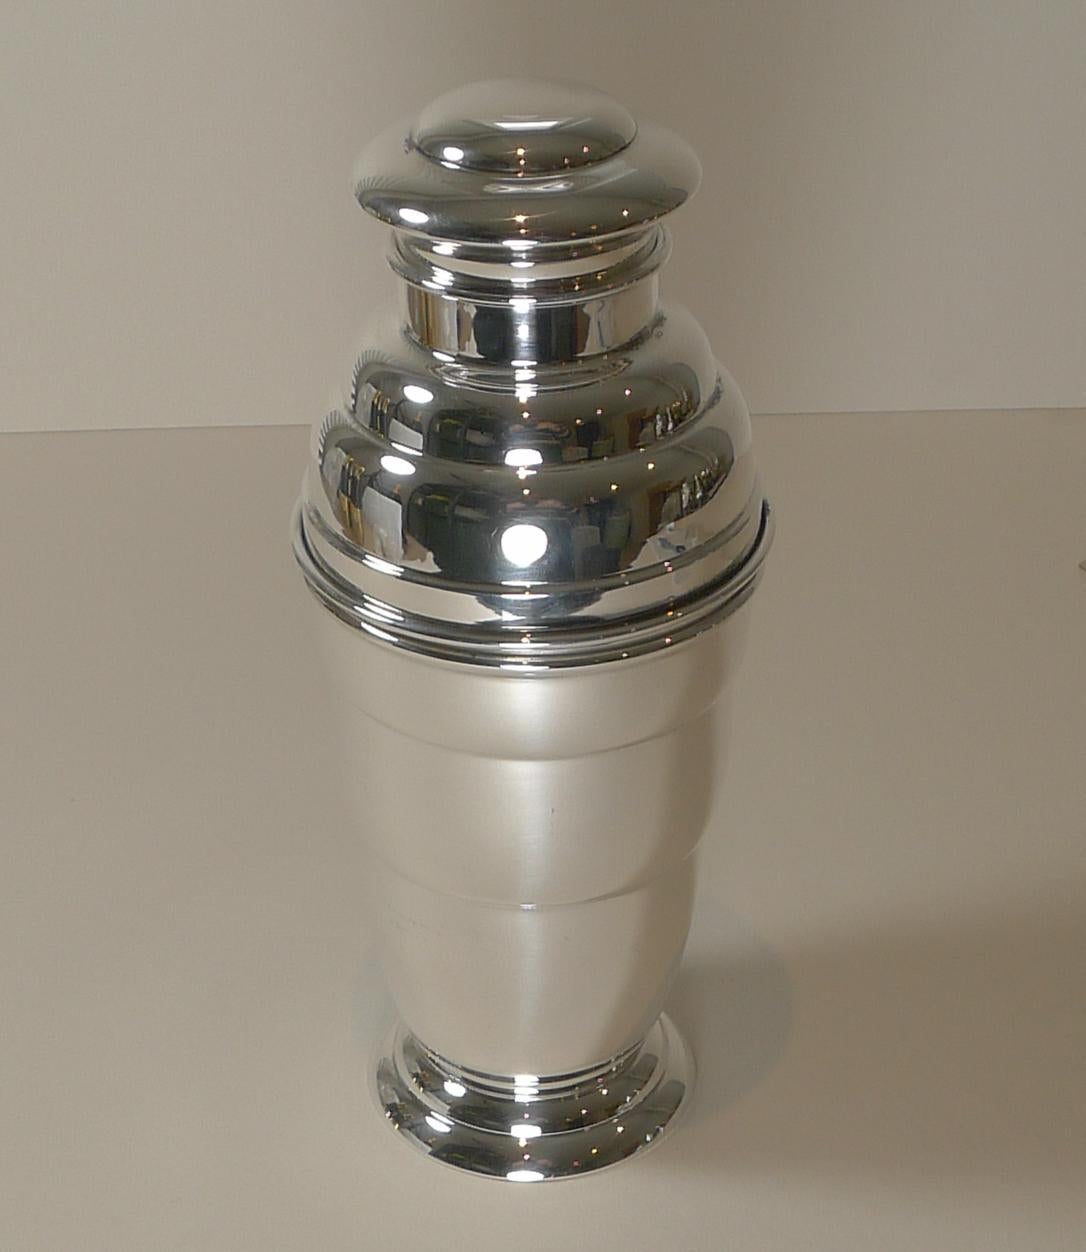 English Art Deco Cocktail Shaker c.1930, Silver Plate 7